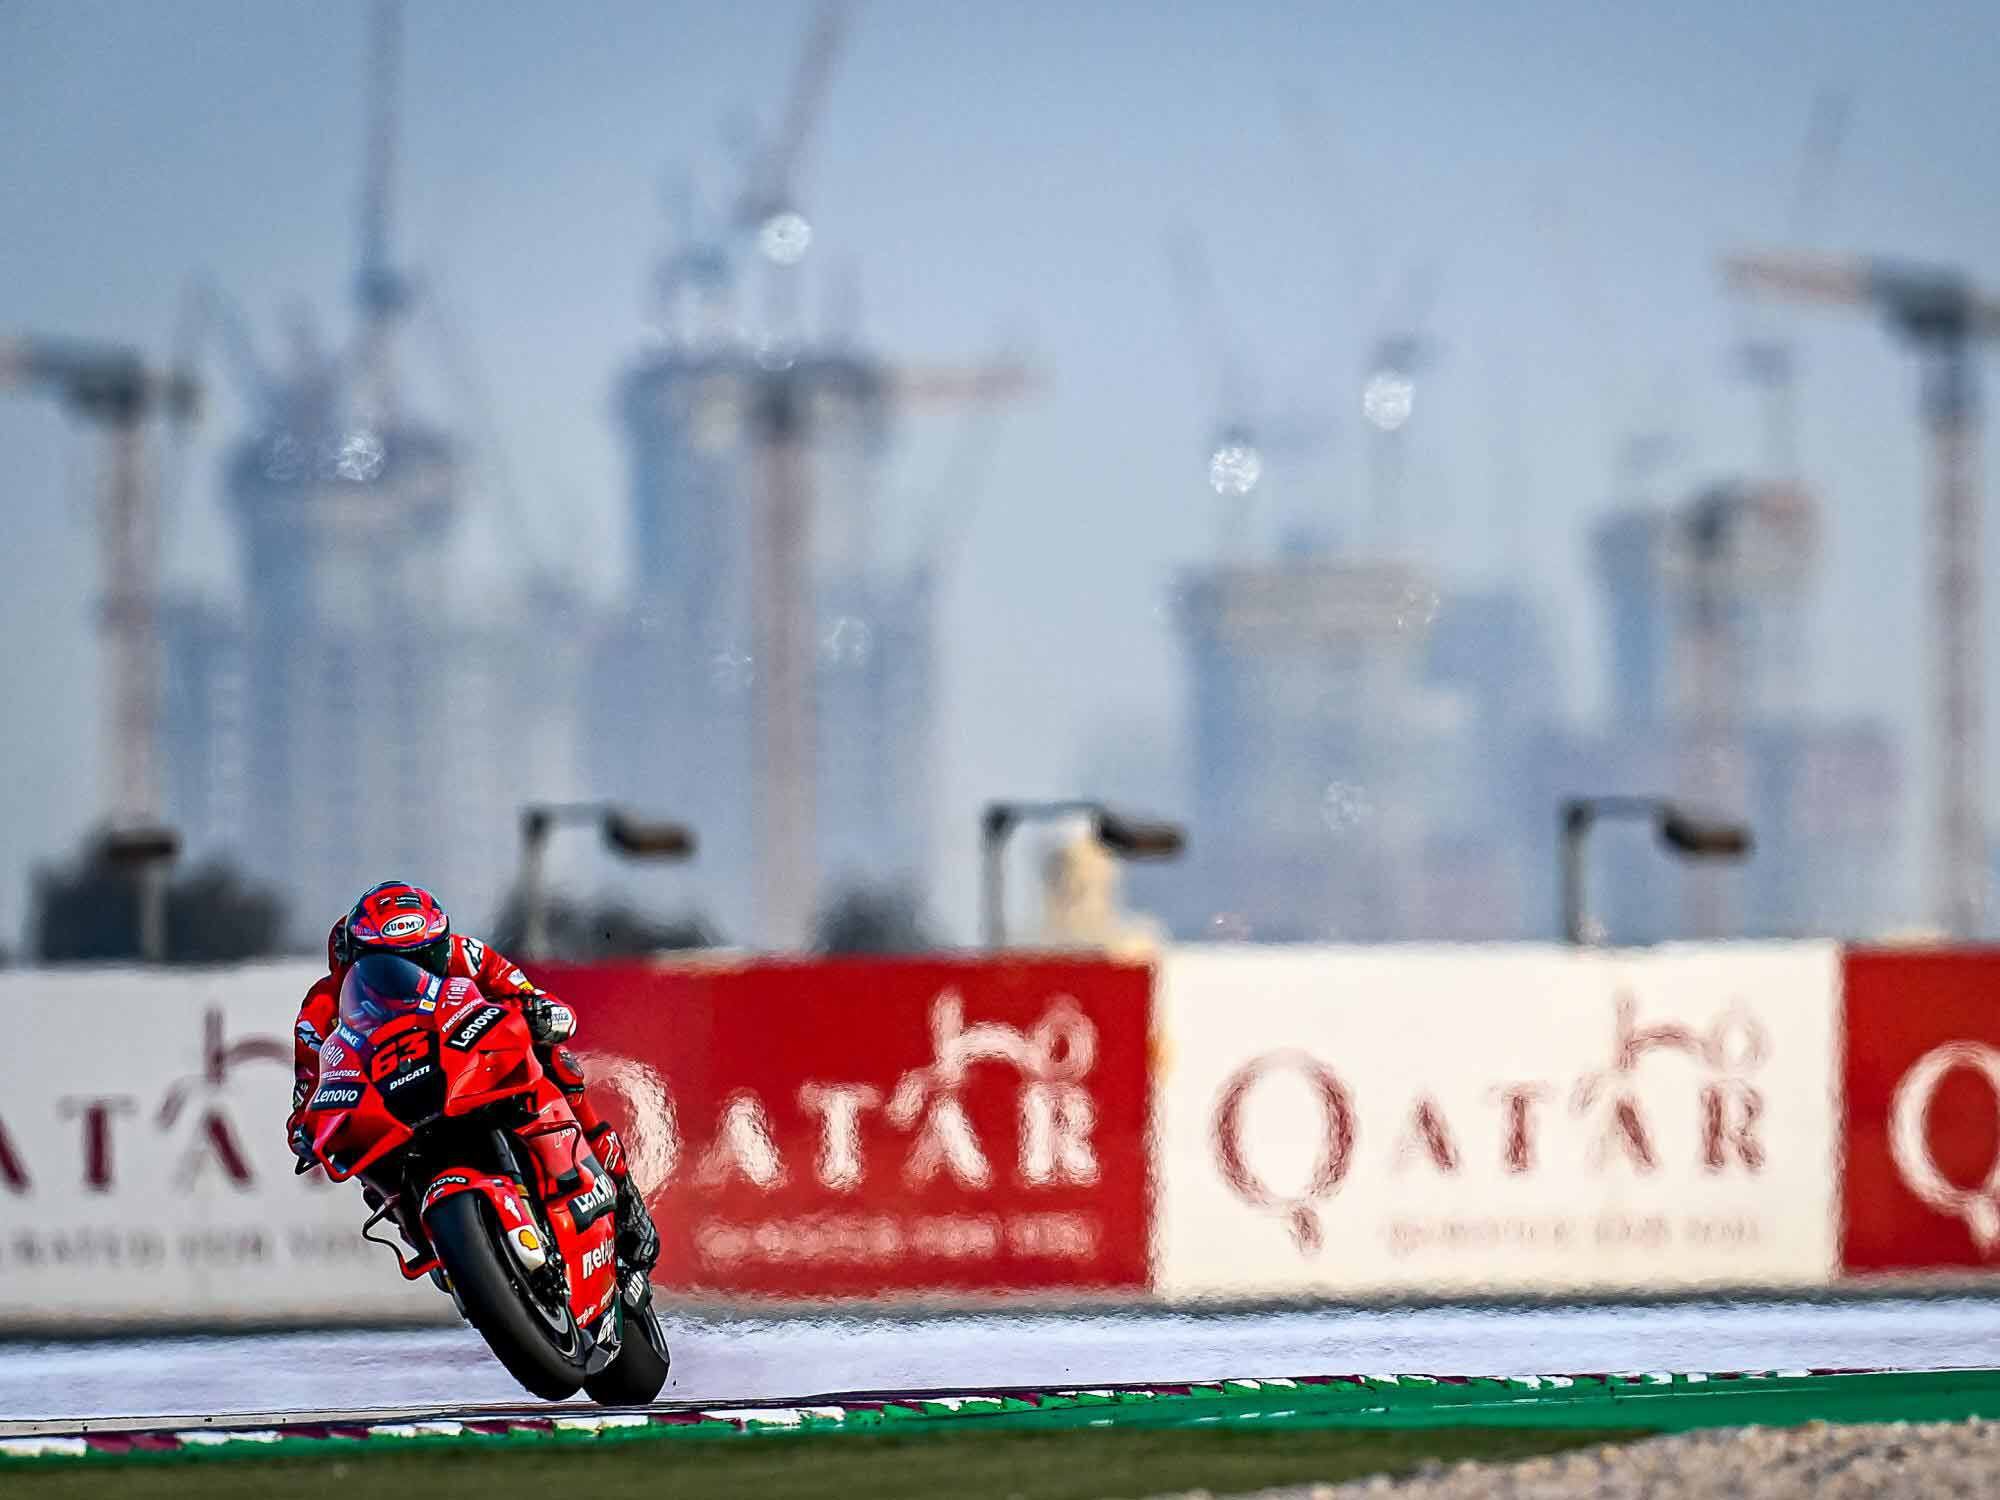 MotoGP testing has concluded at Losail International Circuit, now the focus turns to the first race of the 2021 MotoGP season.